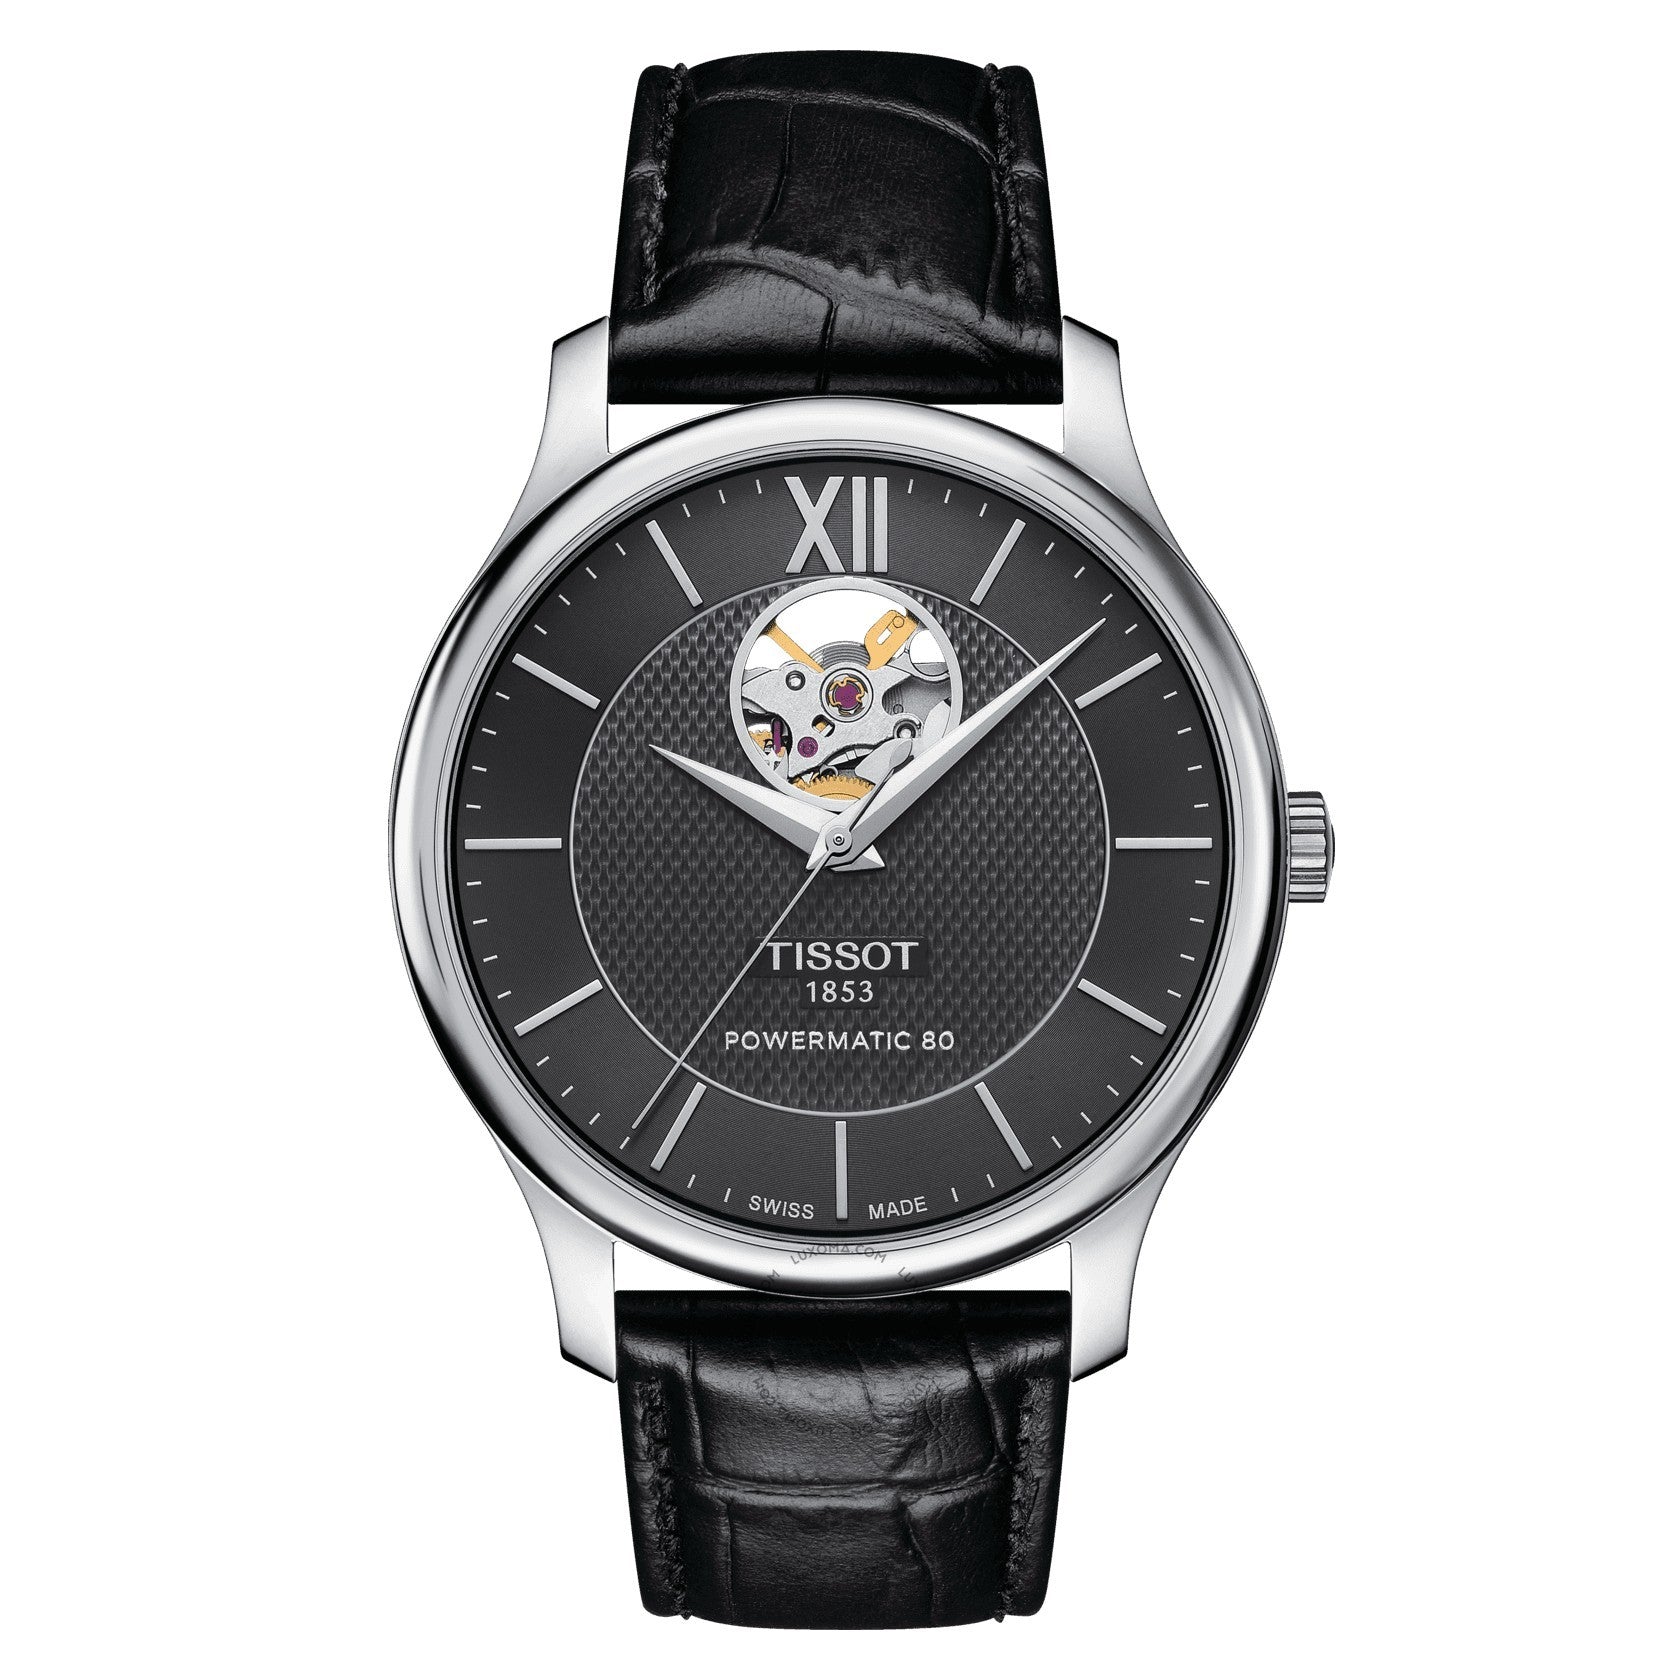 Tissot Tradition Automatic Black (Open-Heart) Dial Men's Watch T063.907.16.058.00